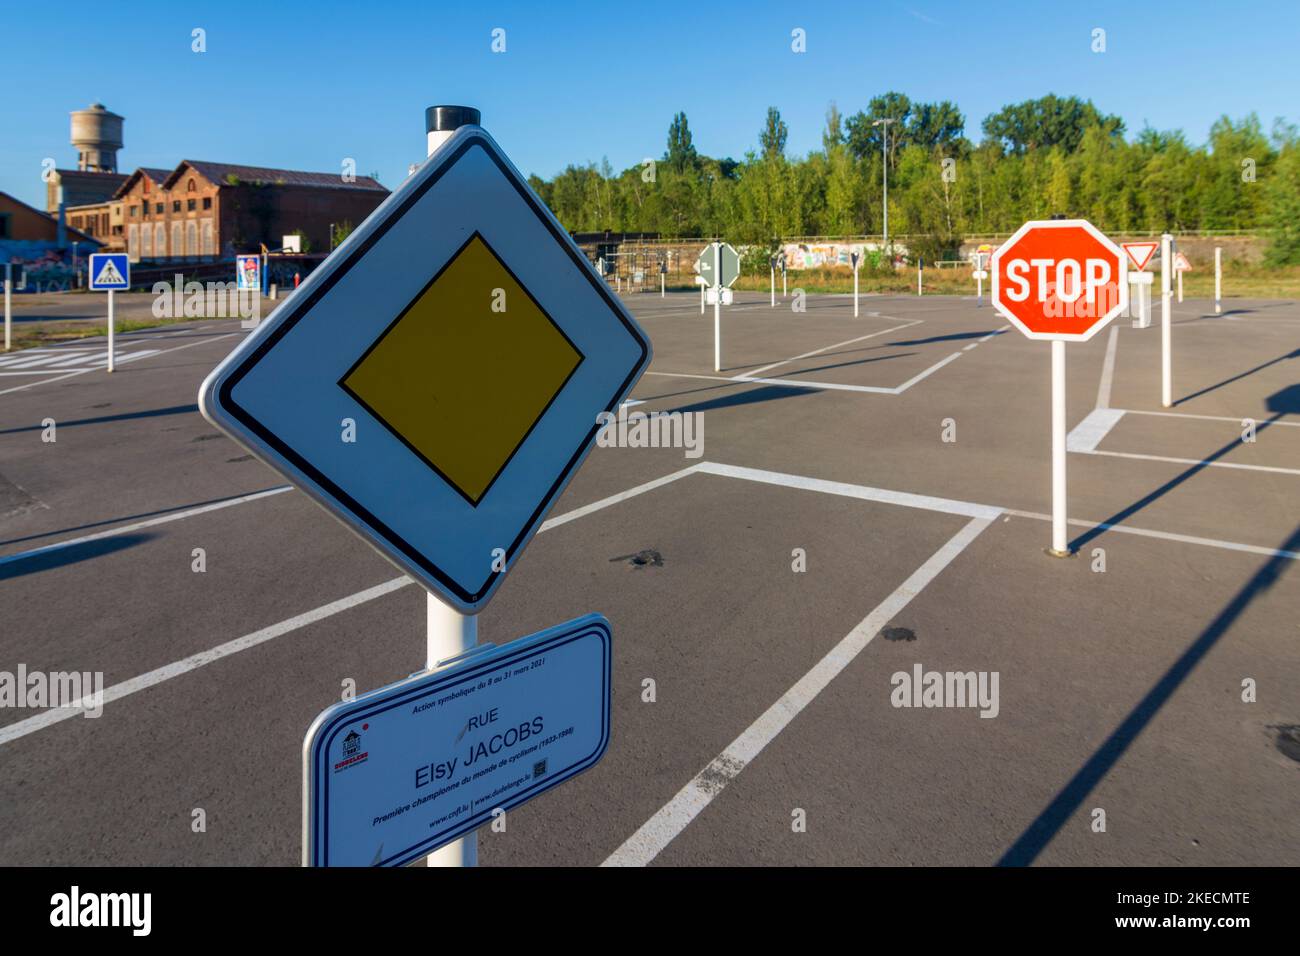 Dudelange (Diddeleng, Düdelingen), traffic training area at former ARBED steelworks area in Luxembourg Stock Photo